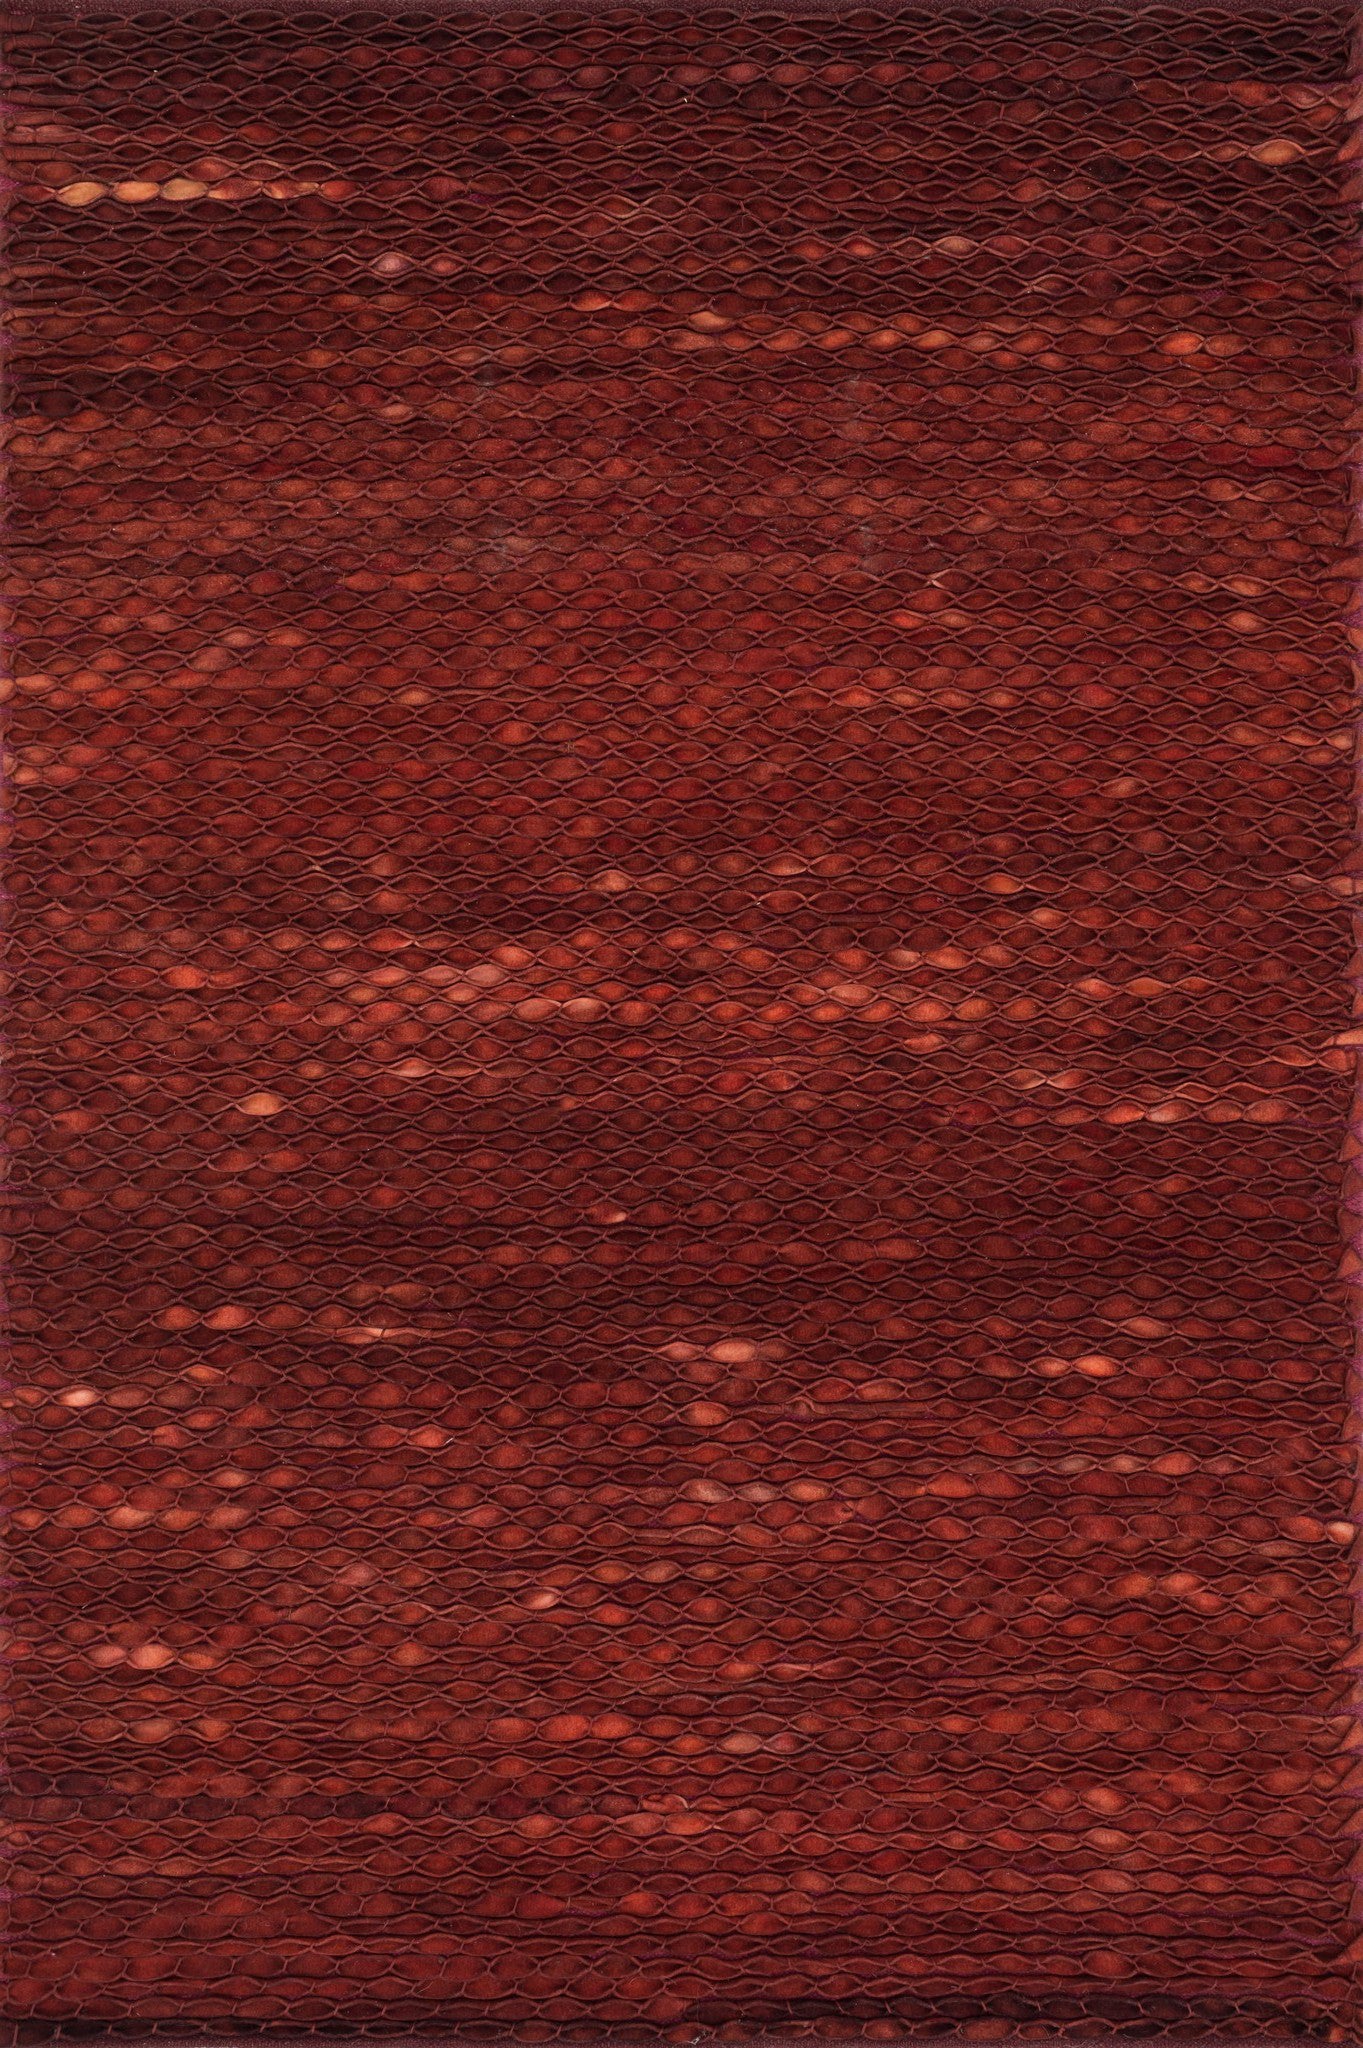 Loloi Royce RC-03 Red Area Rug main image